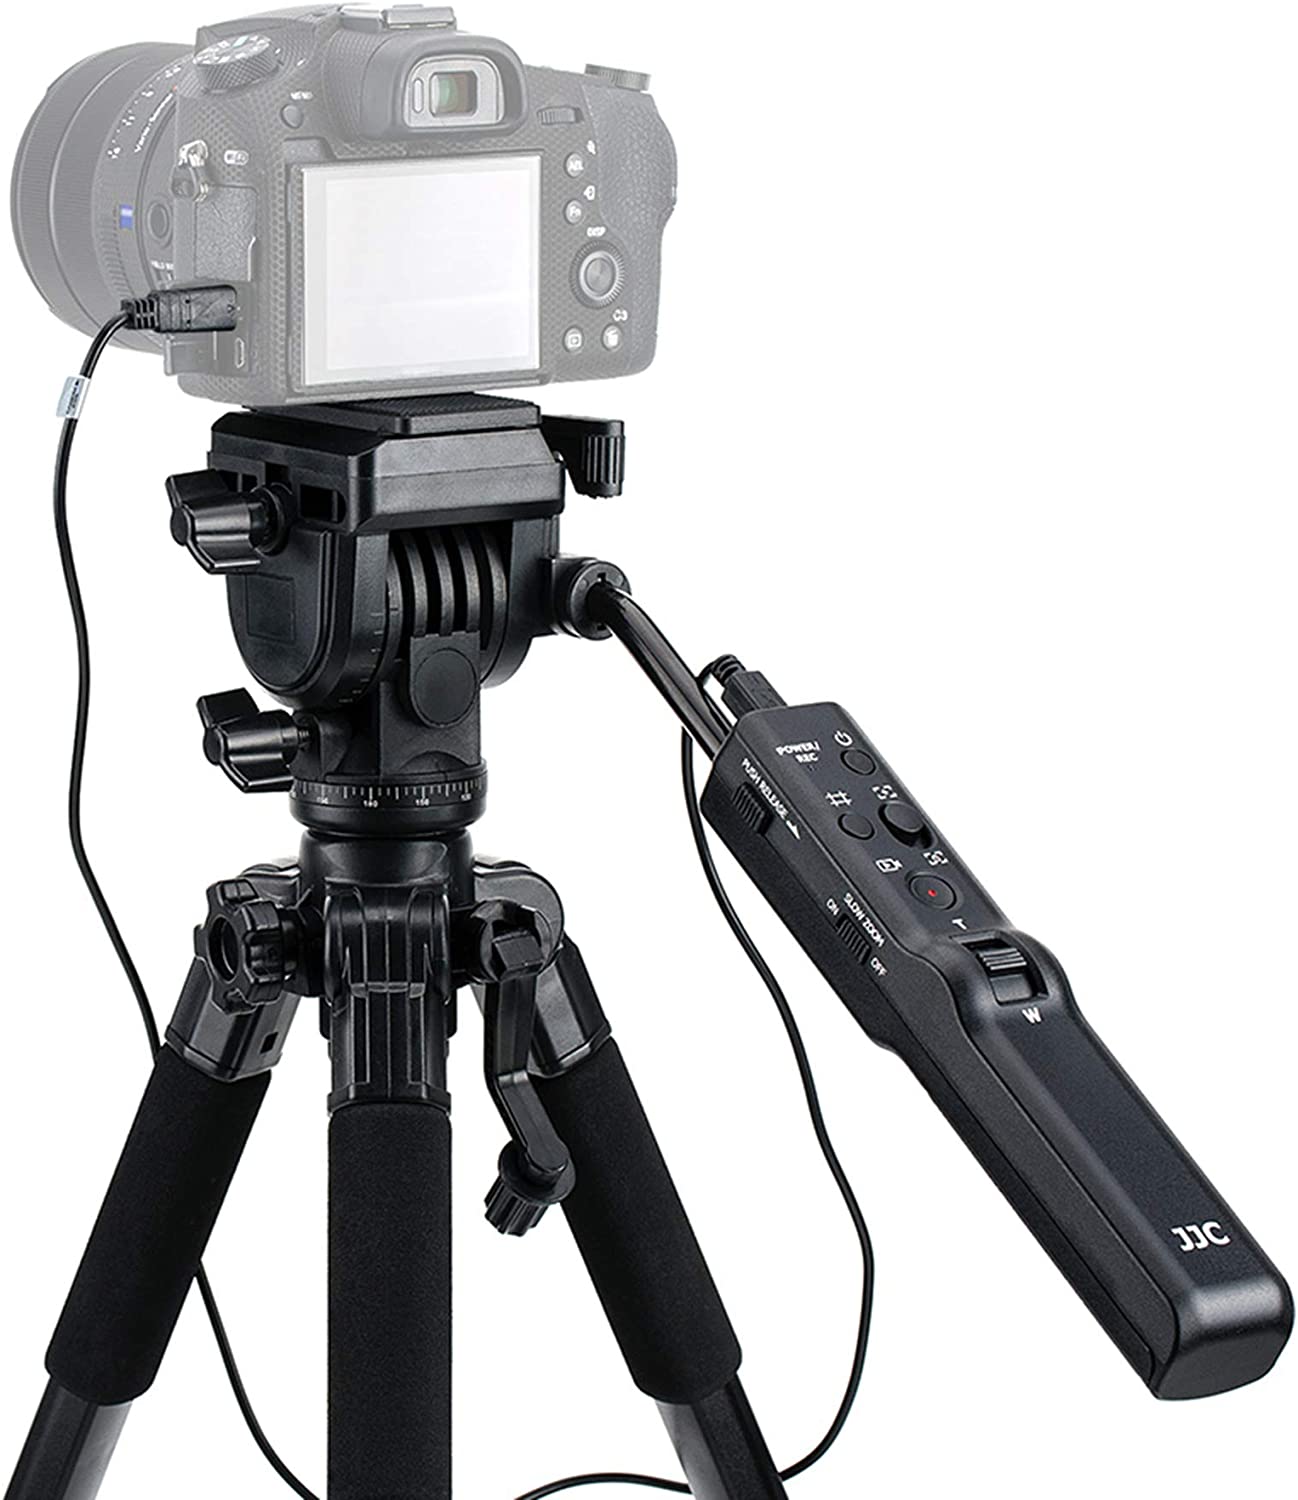 JJC_VCT-VPR1_Compact_Remote_Control_Tripod_Stand_for_Sony.jpg